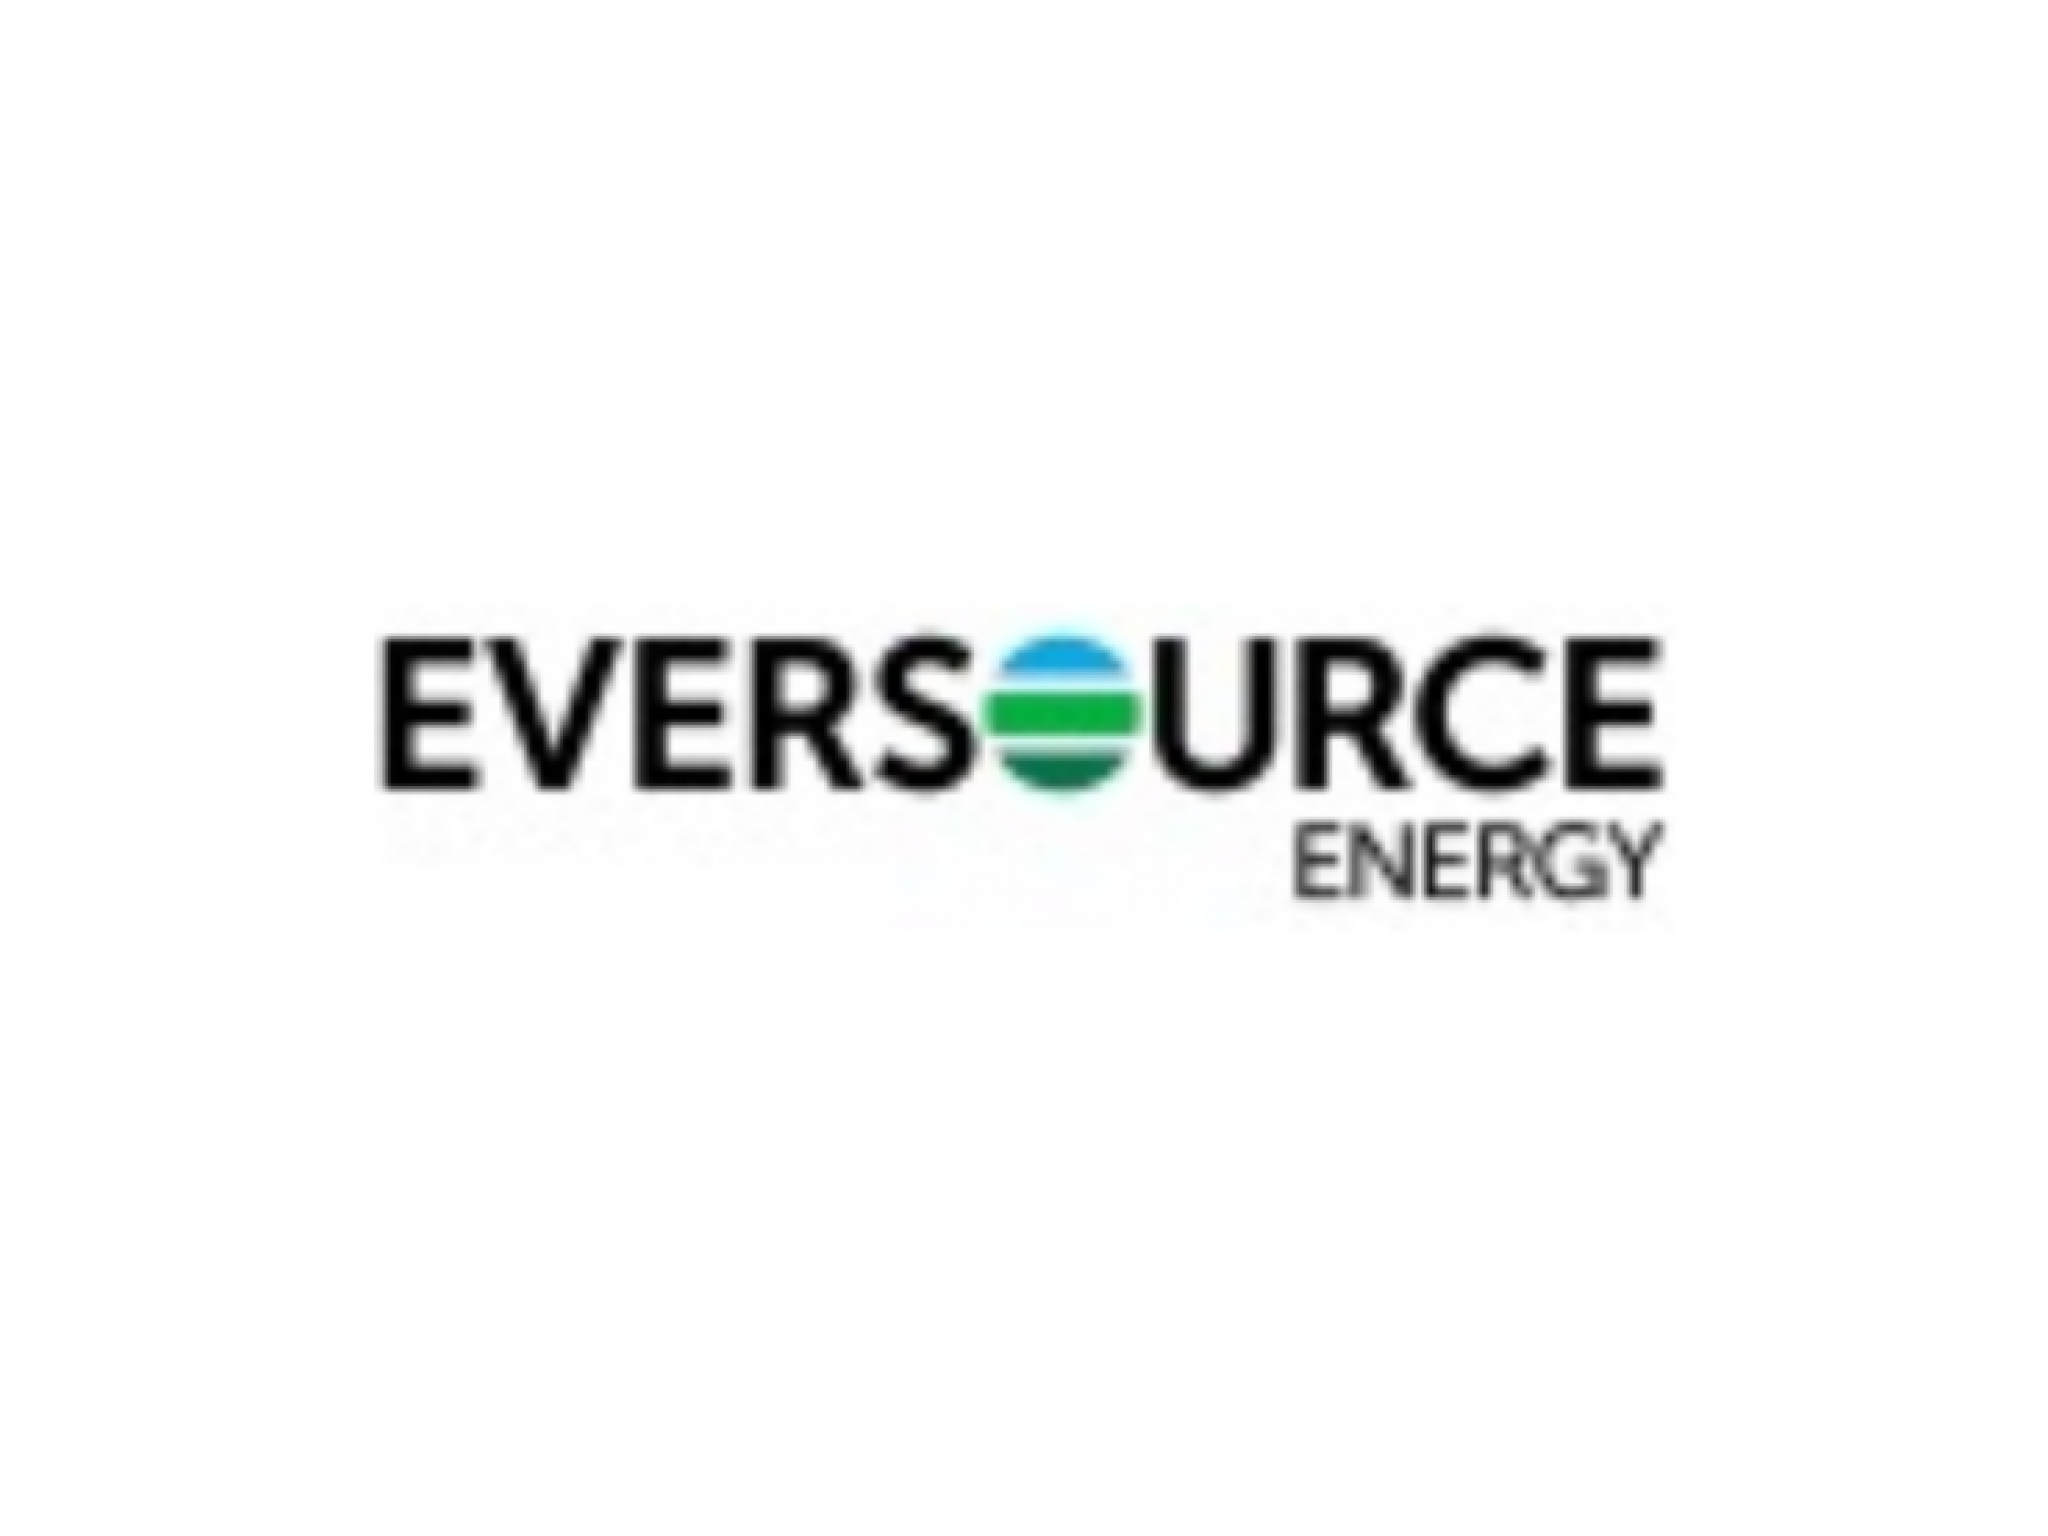  eversources-q4-earnings-miss-offshore-wind-business-exit-eyes-water-distribution-business-sale--more 